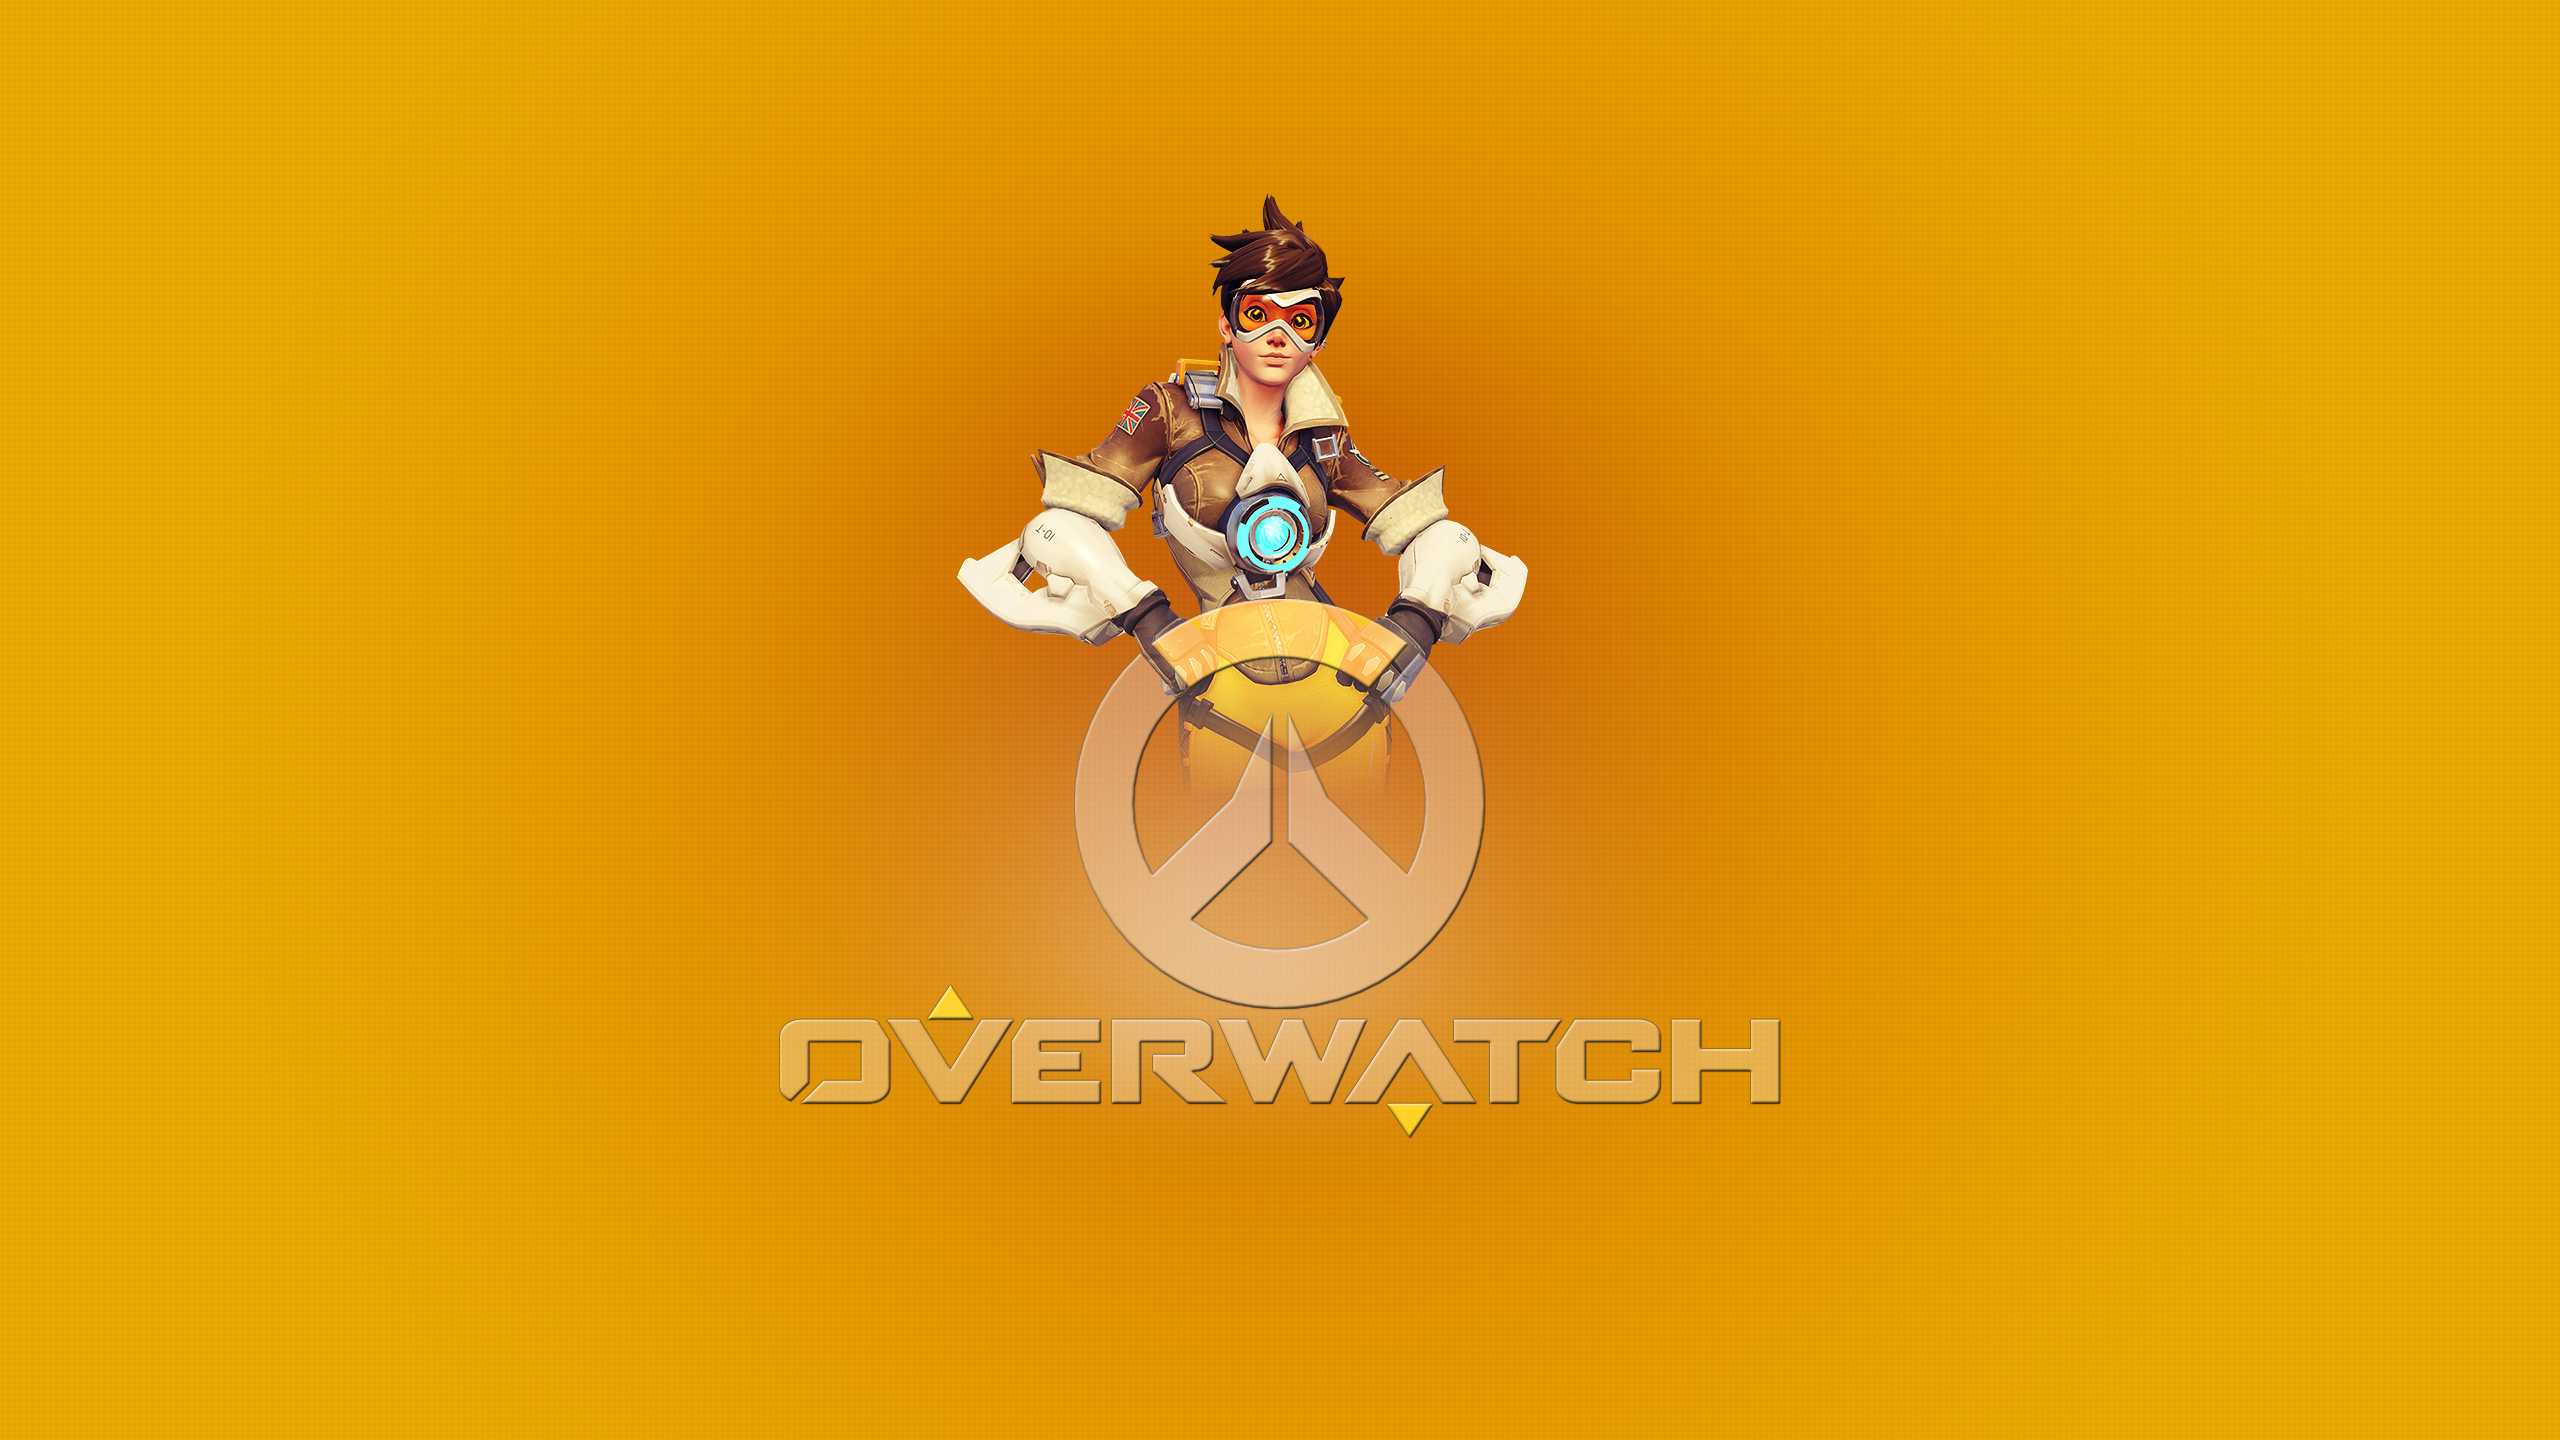 Overwatch Tracer Poster Wallpapers HD Wallpapers